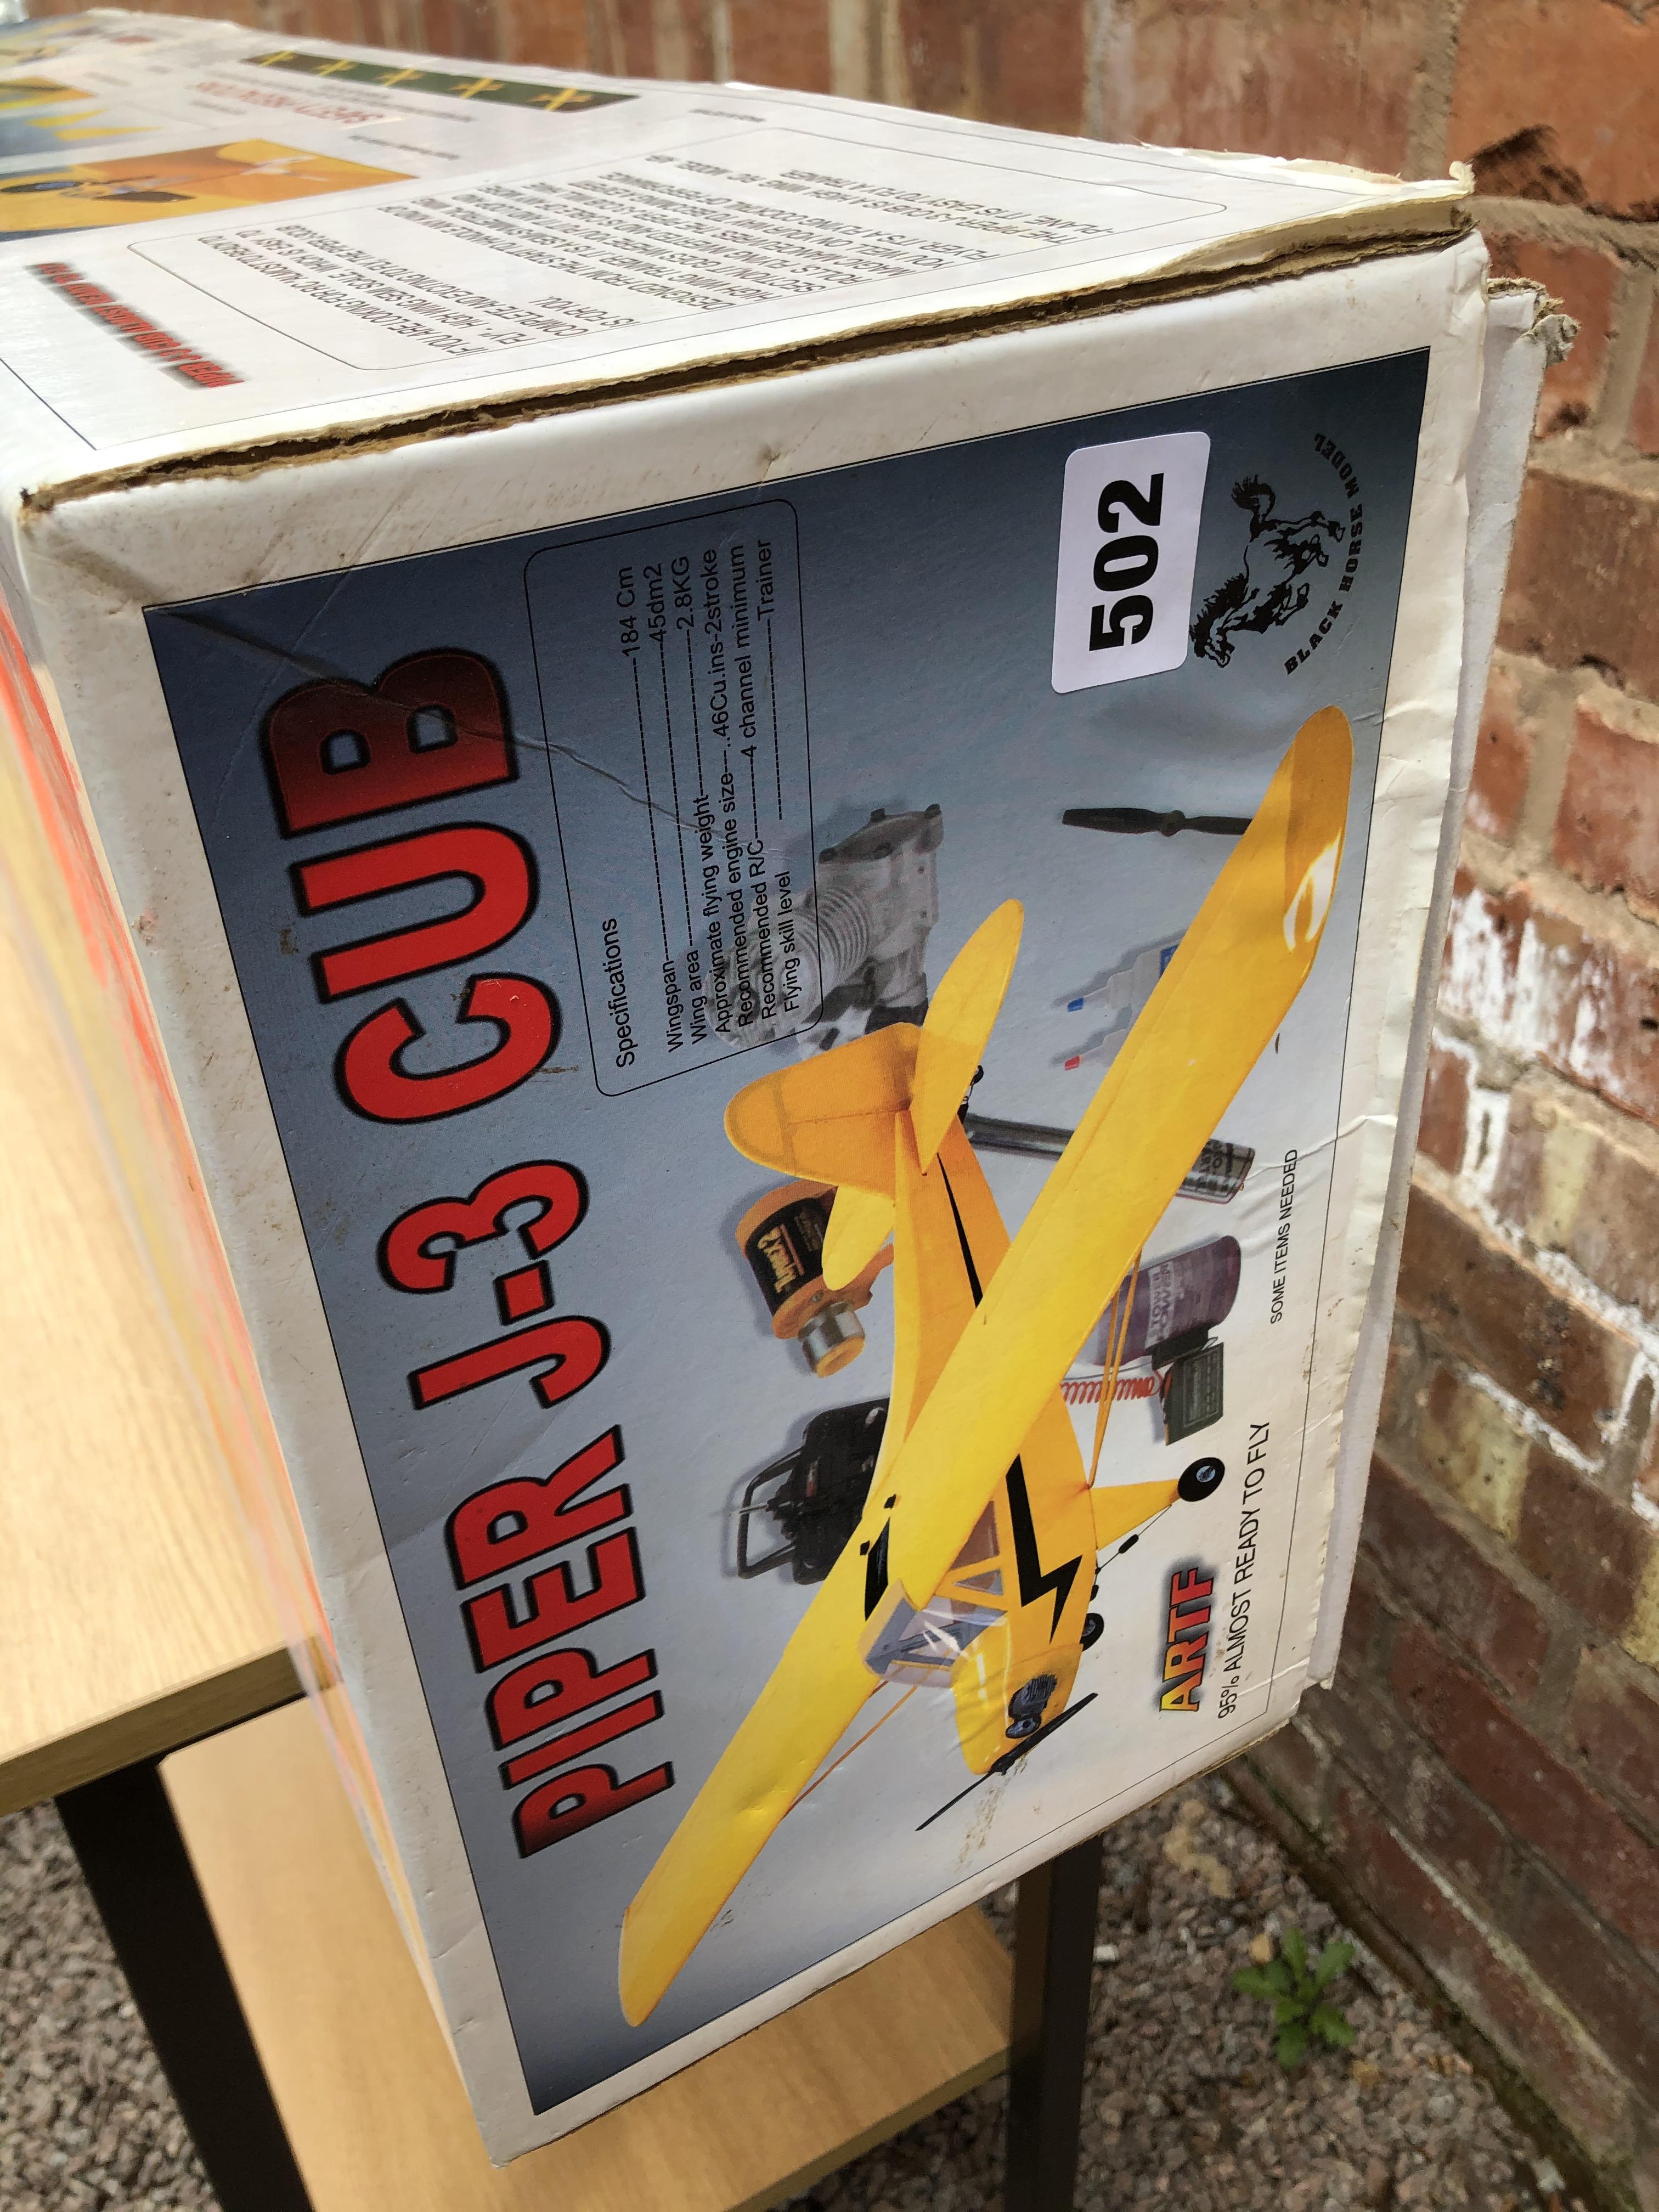 BOXED HYPER J3 CUB SEMI SCALE ALMOST READY TO FLY MODEL KIT, - Image 2 of 6